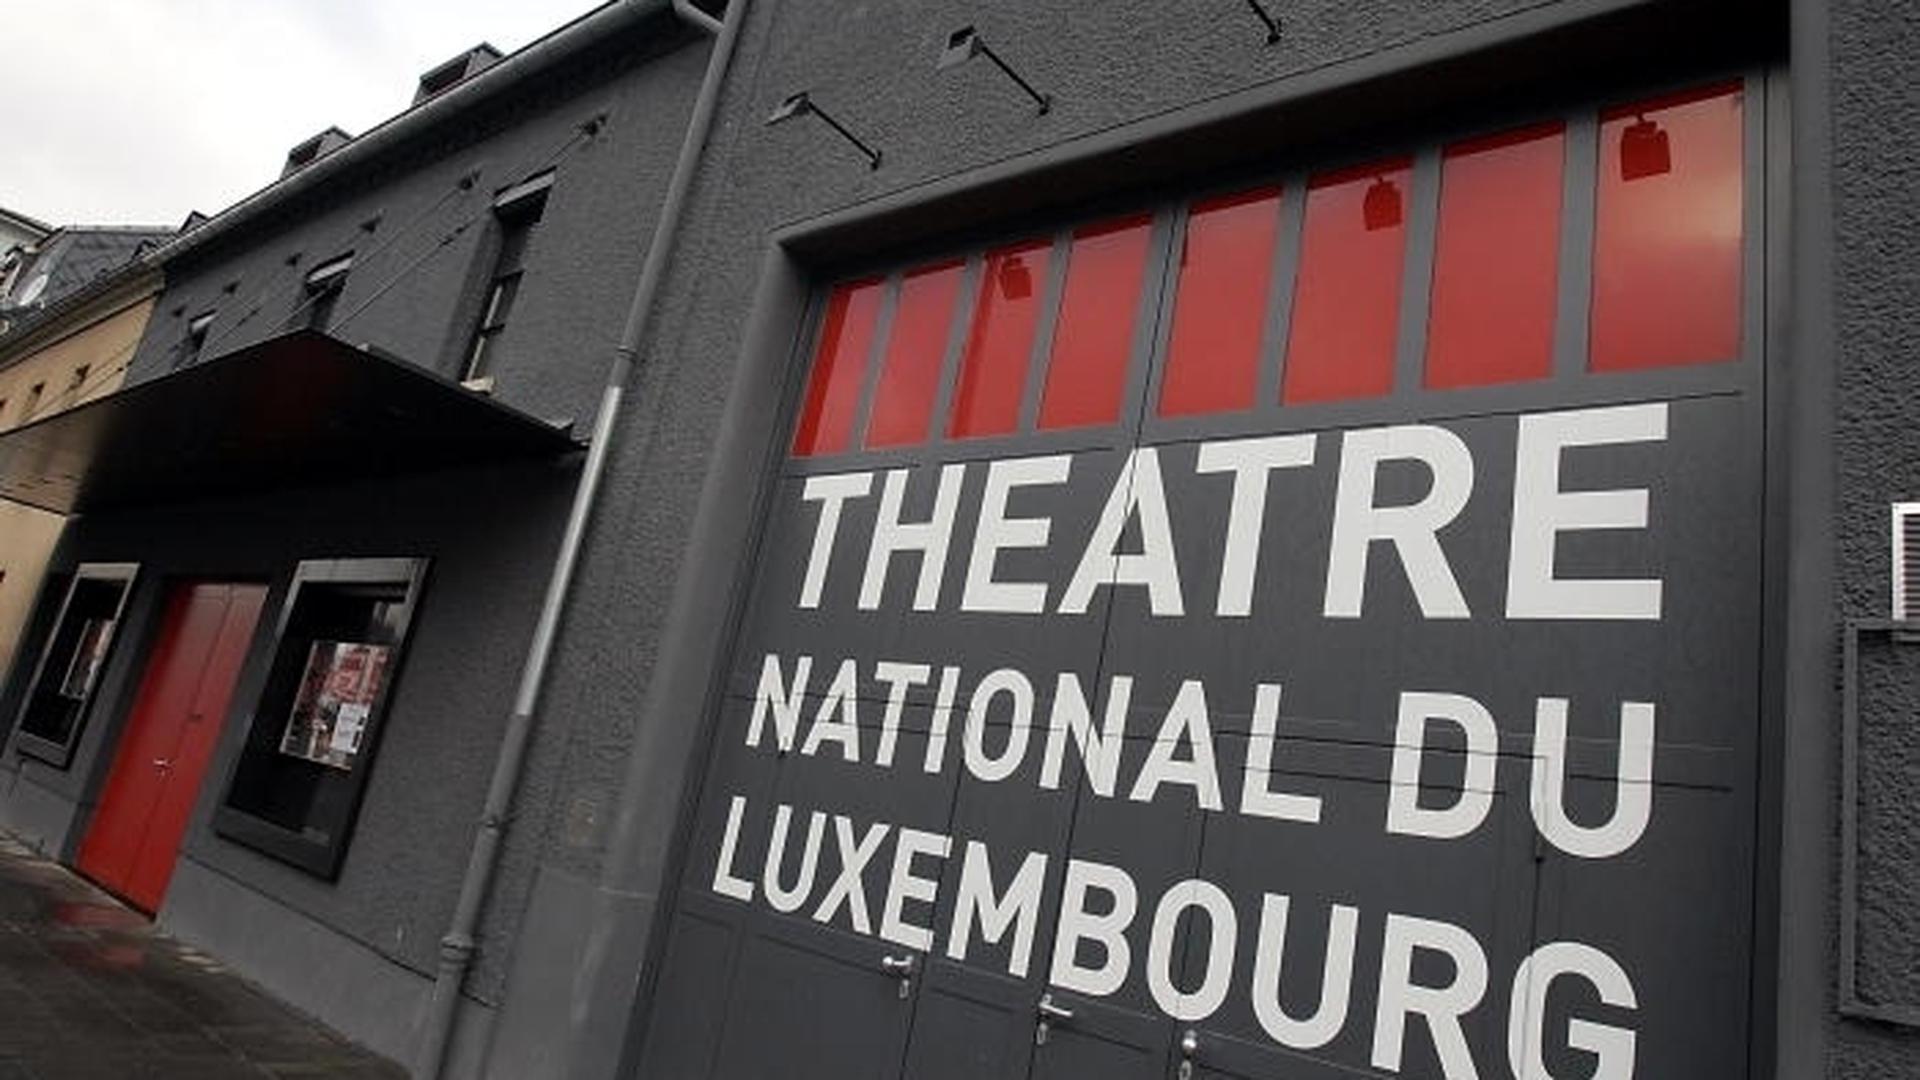 The TNL is a small intimate space showcasing English theatre from Shakespeare to local theatre performances